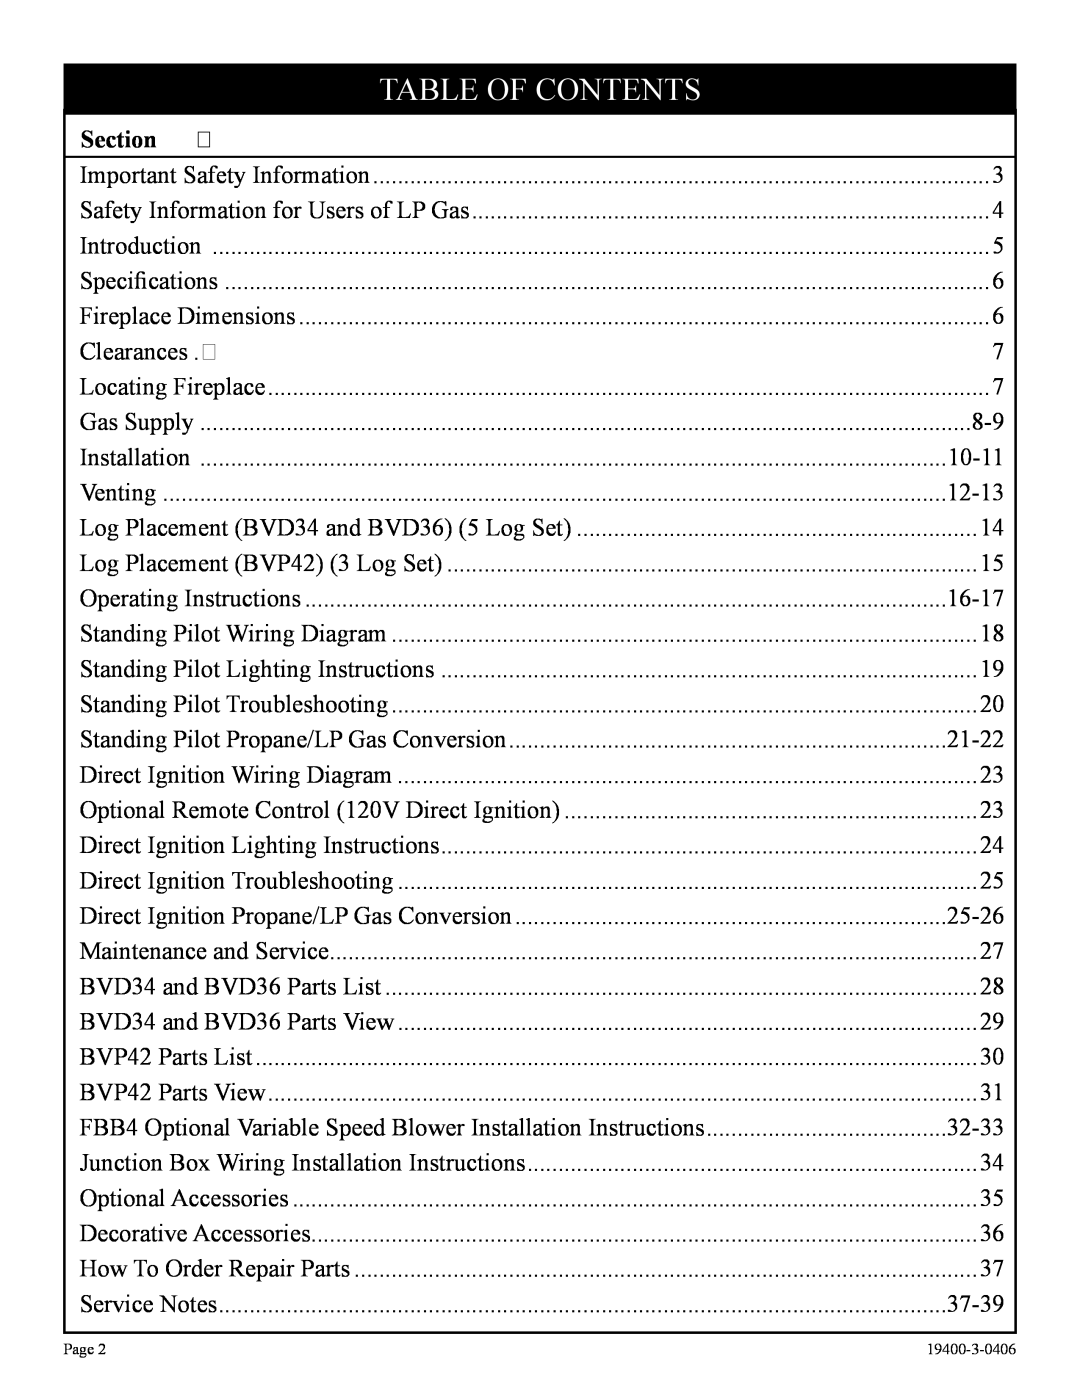 Vulcan-Hart BVP42FP32(F,L)N-1, BVP42FP52(F,L)N-1, BVD34FP50(F,L)N-1, BVD36FP52(F,L)N-1 Table Of Contents, Section 